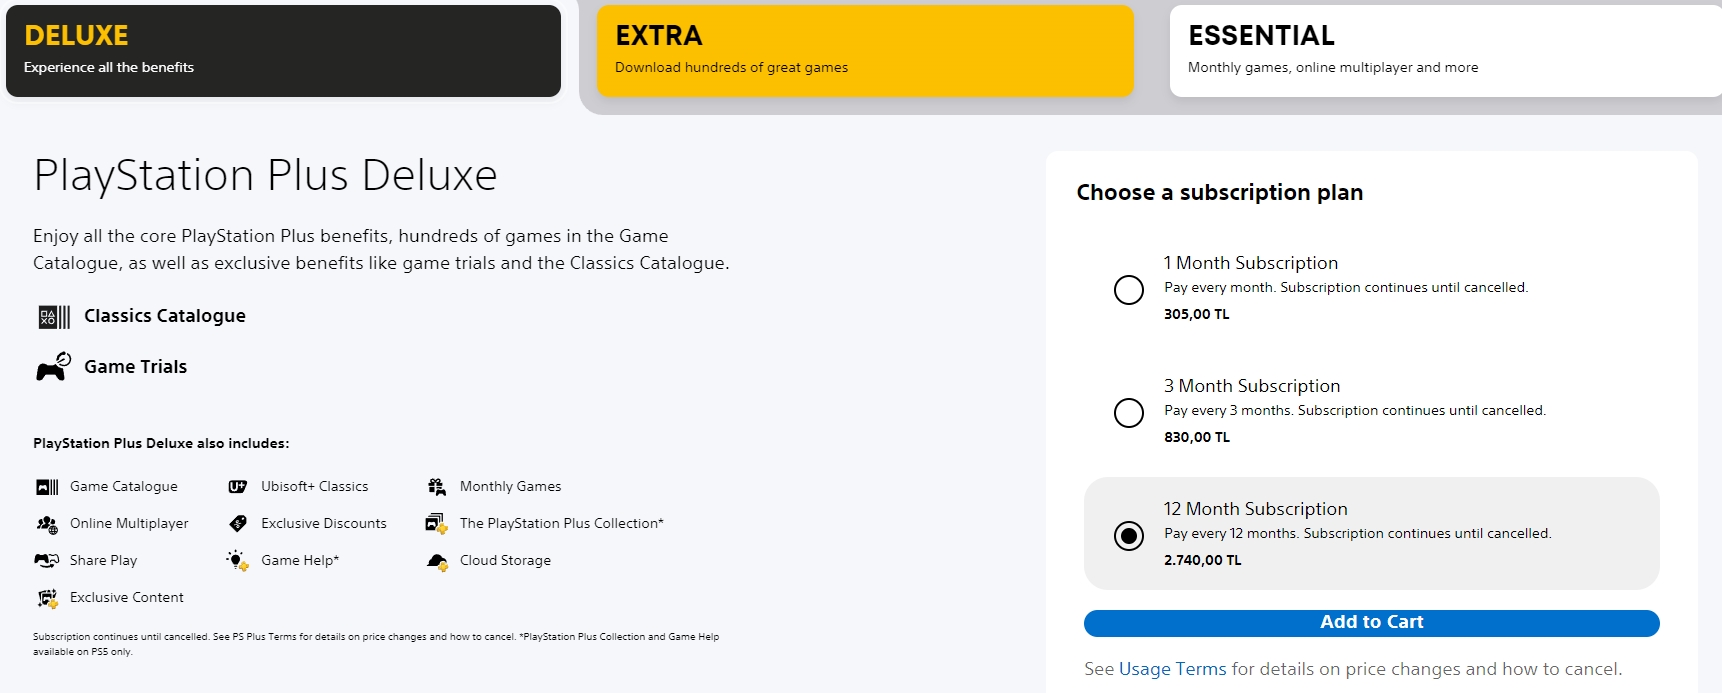 PlayStation Plus Extra 3 Months Subscription ACCOUNT